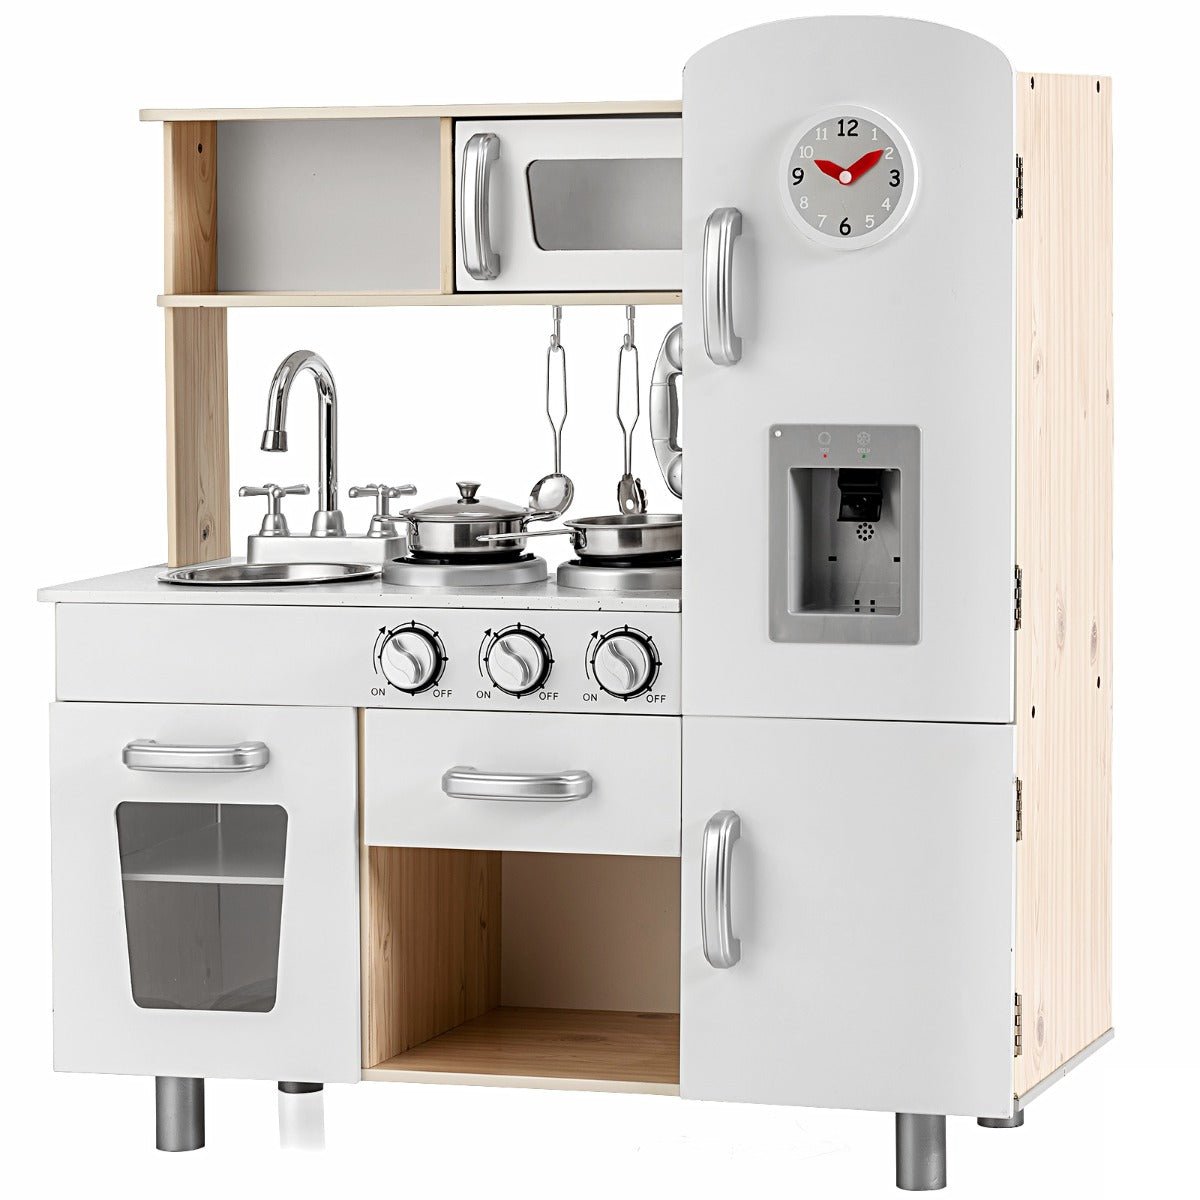 Culinary Adventures: Wooden Pretend Cooking Playset with Water Dispenser